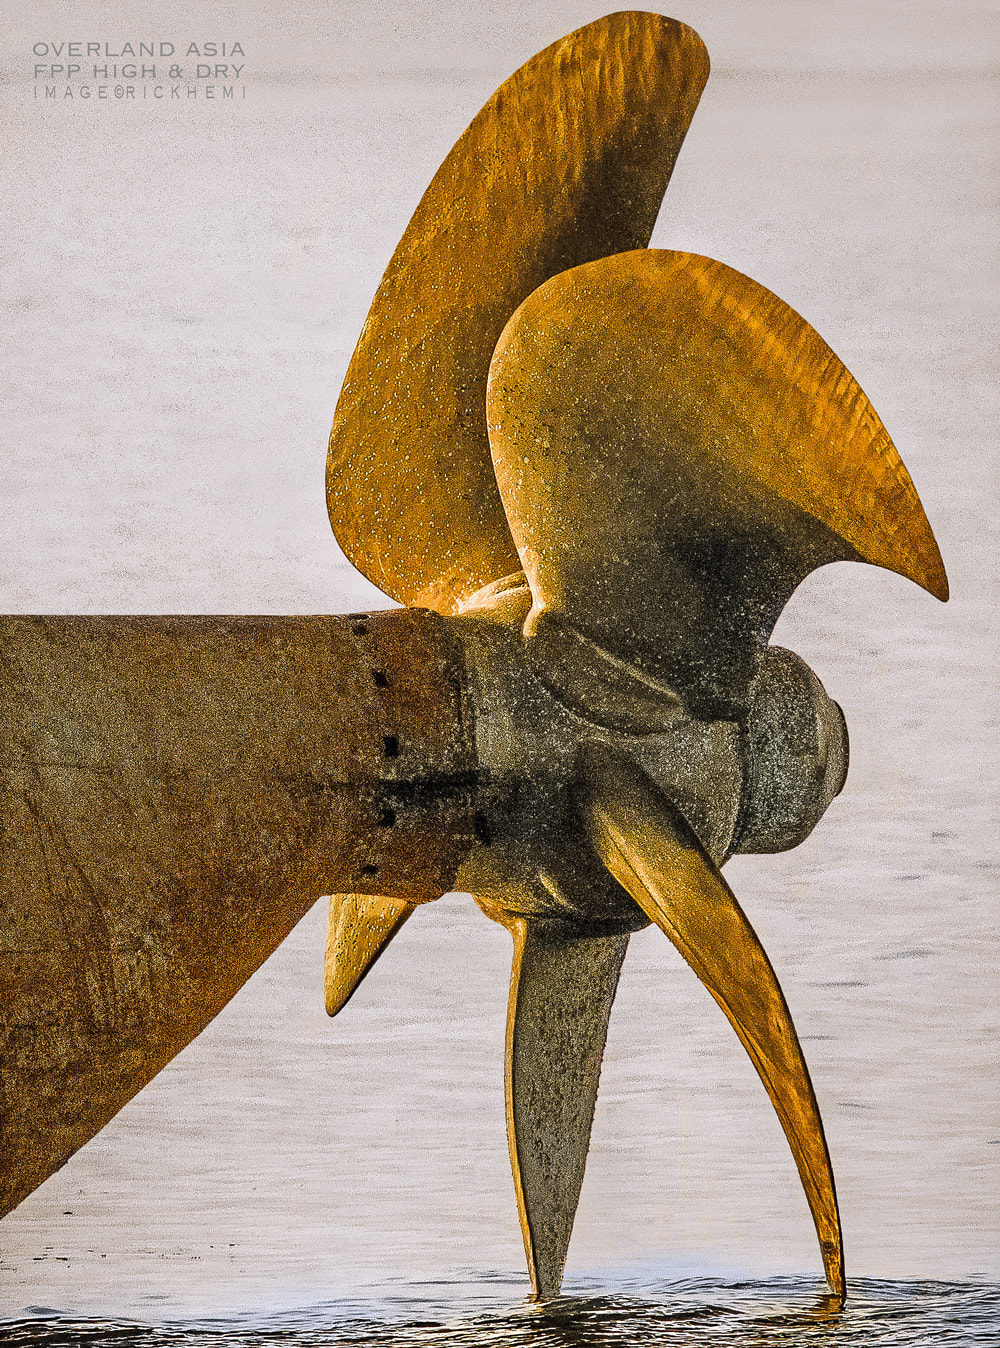 Asia overland travel, photography Asia, fixed pitched propeller, cargo container ship breaking Asia, image by Rick Hemi